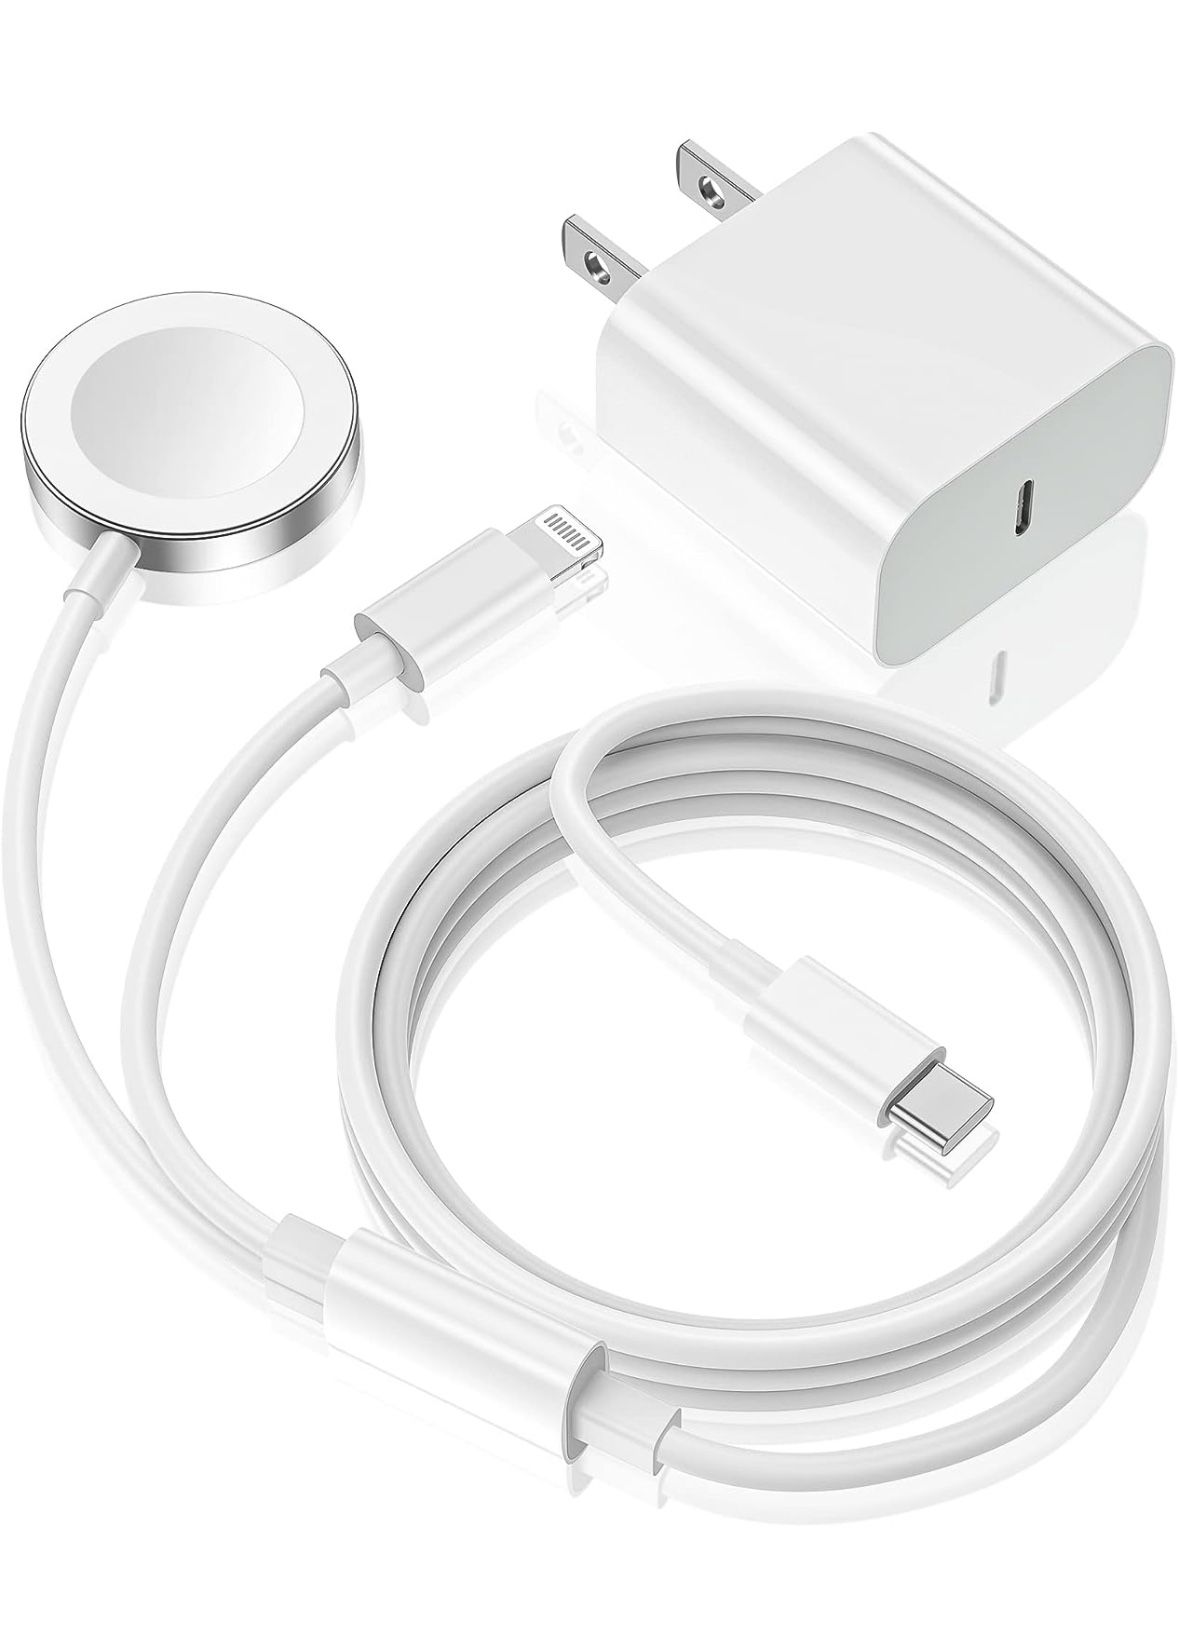 Apple Watch Charger,Upgraded 2-in-1 USB C Fast iPhone Watch Charger [Apple MFi Certified] 6FT Magnetic Charging Cable with 15W Wall Charger Block for 